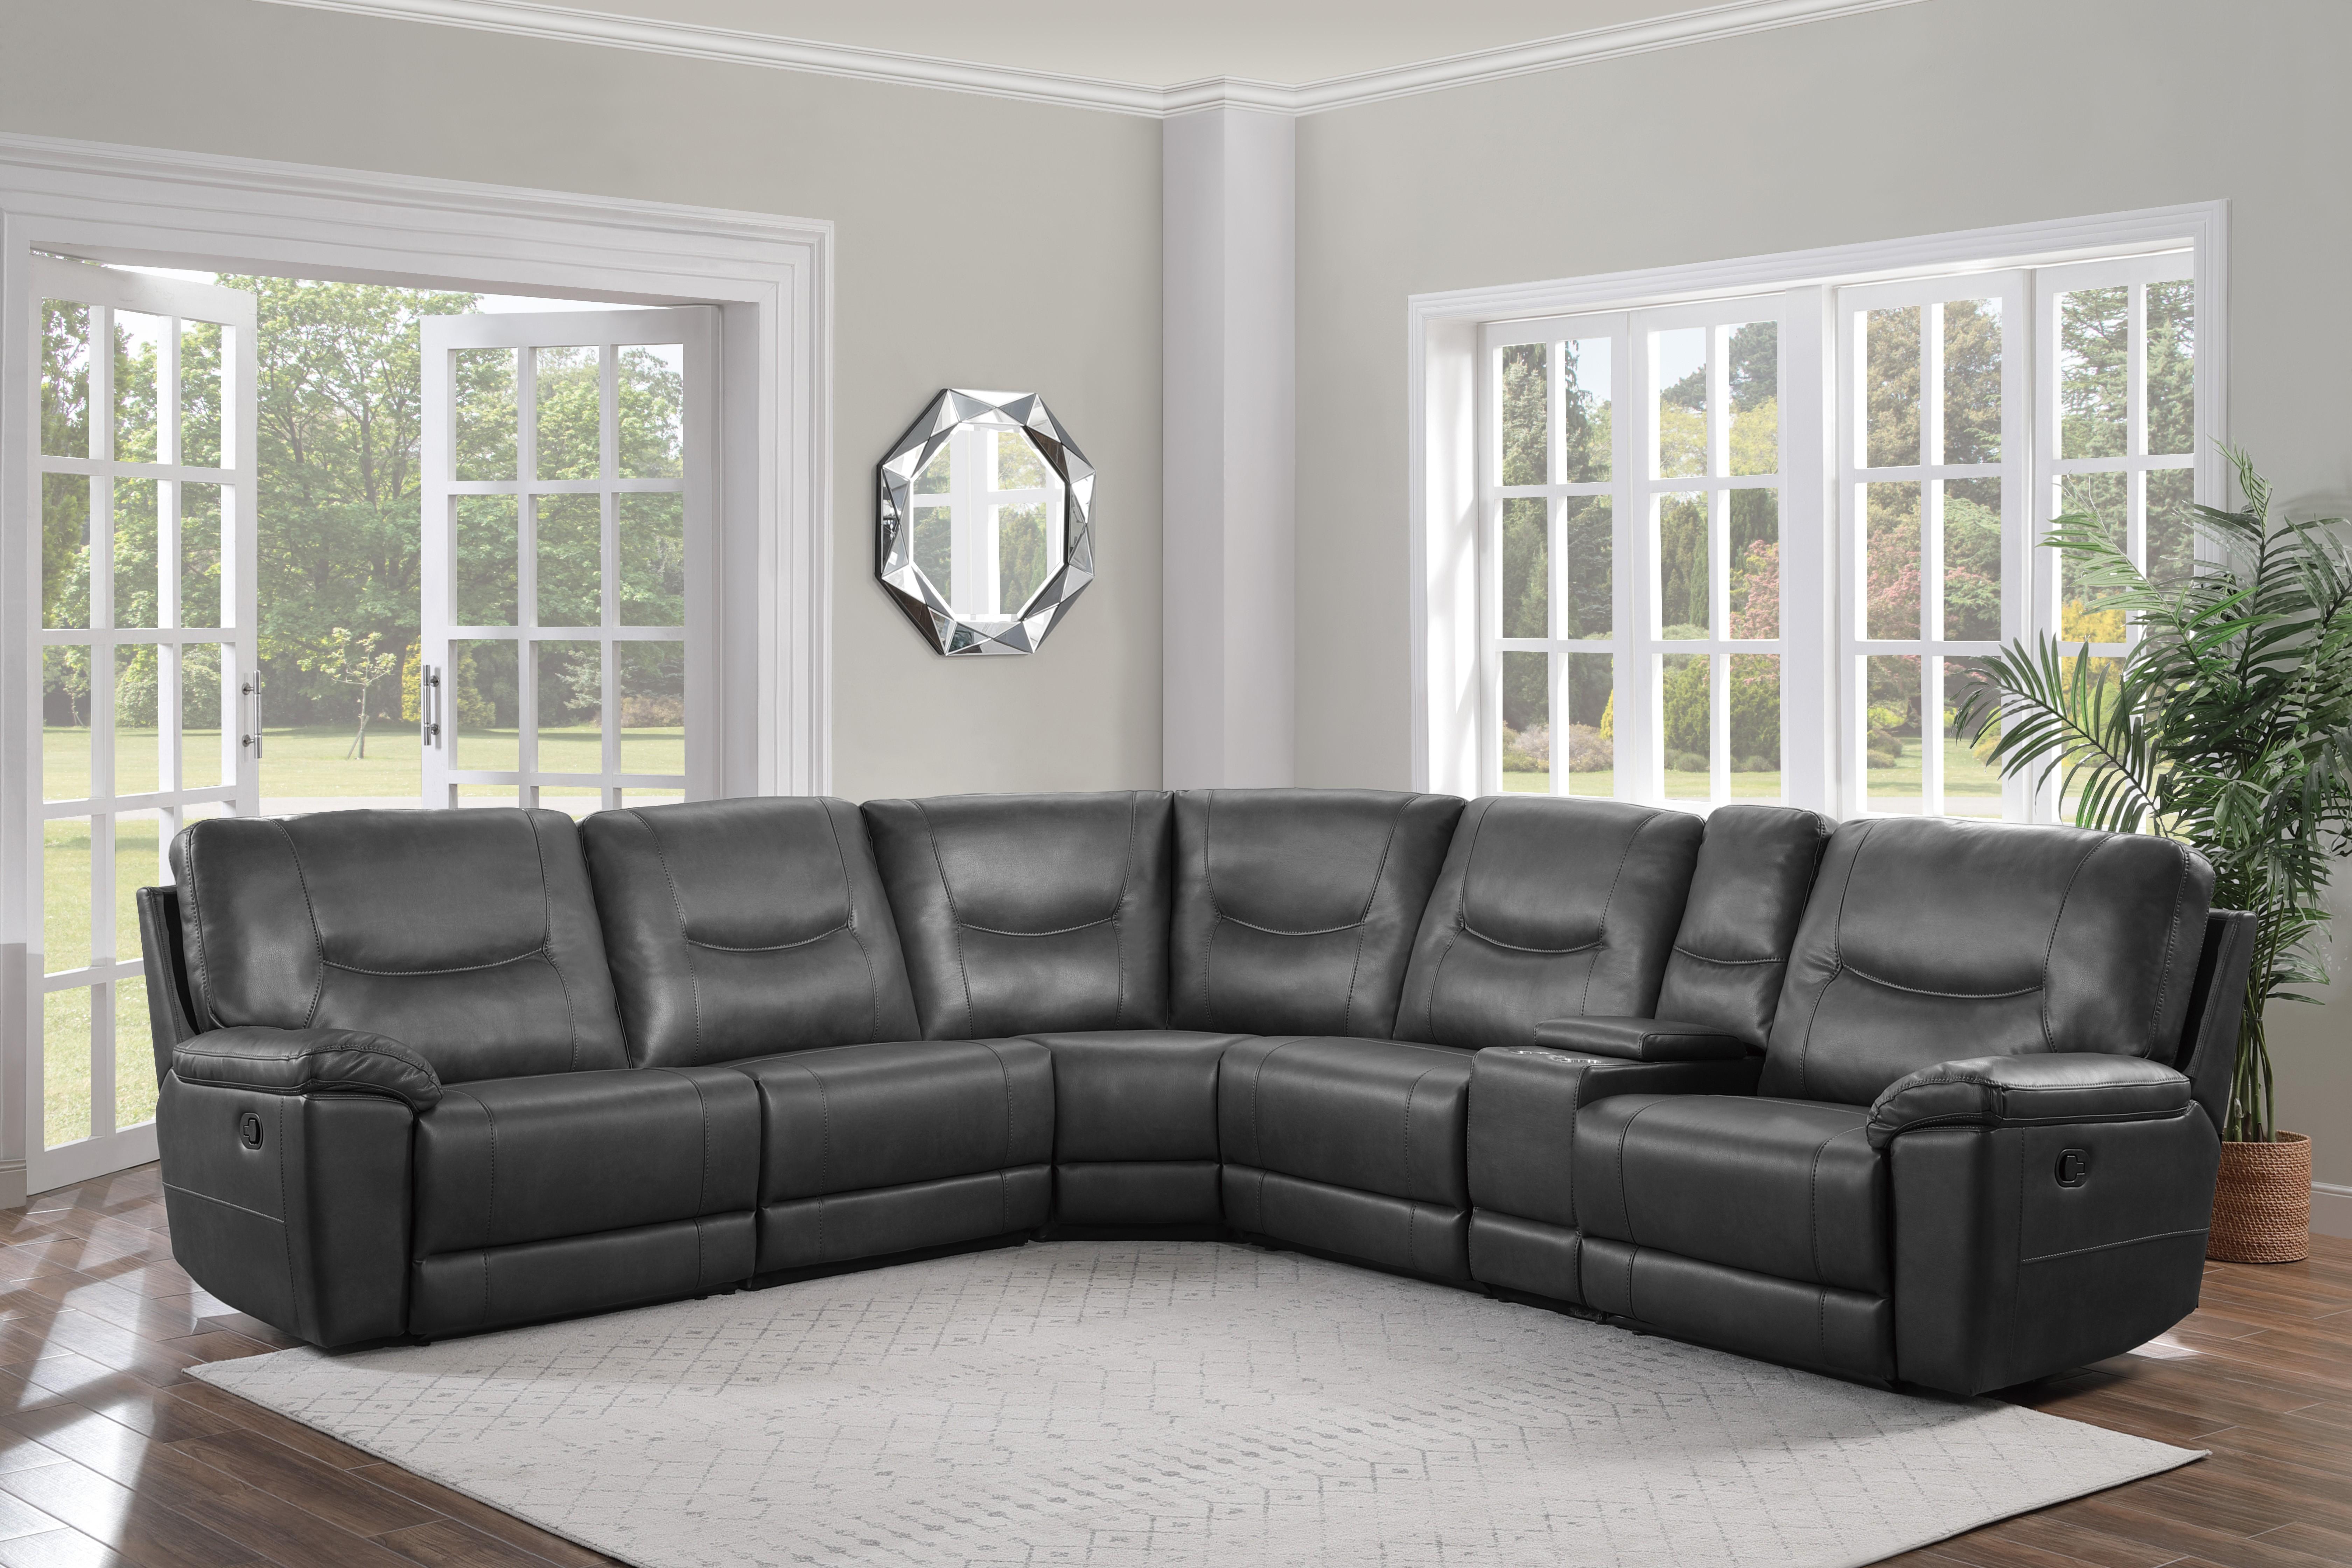 

    
8490GRY*6LRRR Modern Gray Faux Leather 6-Piece Reclining Sectional Homelegance 8490GRY Columbus
